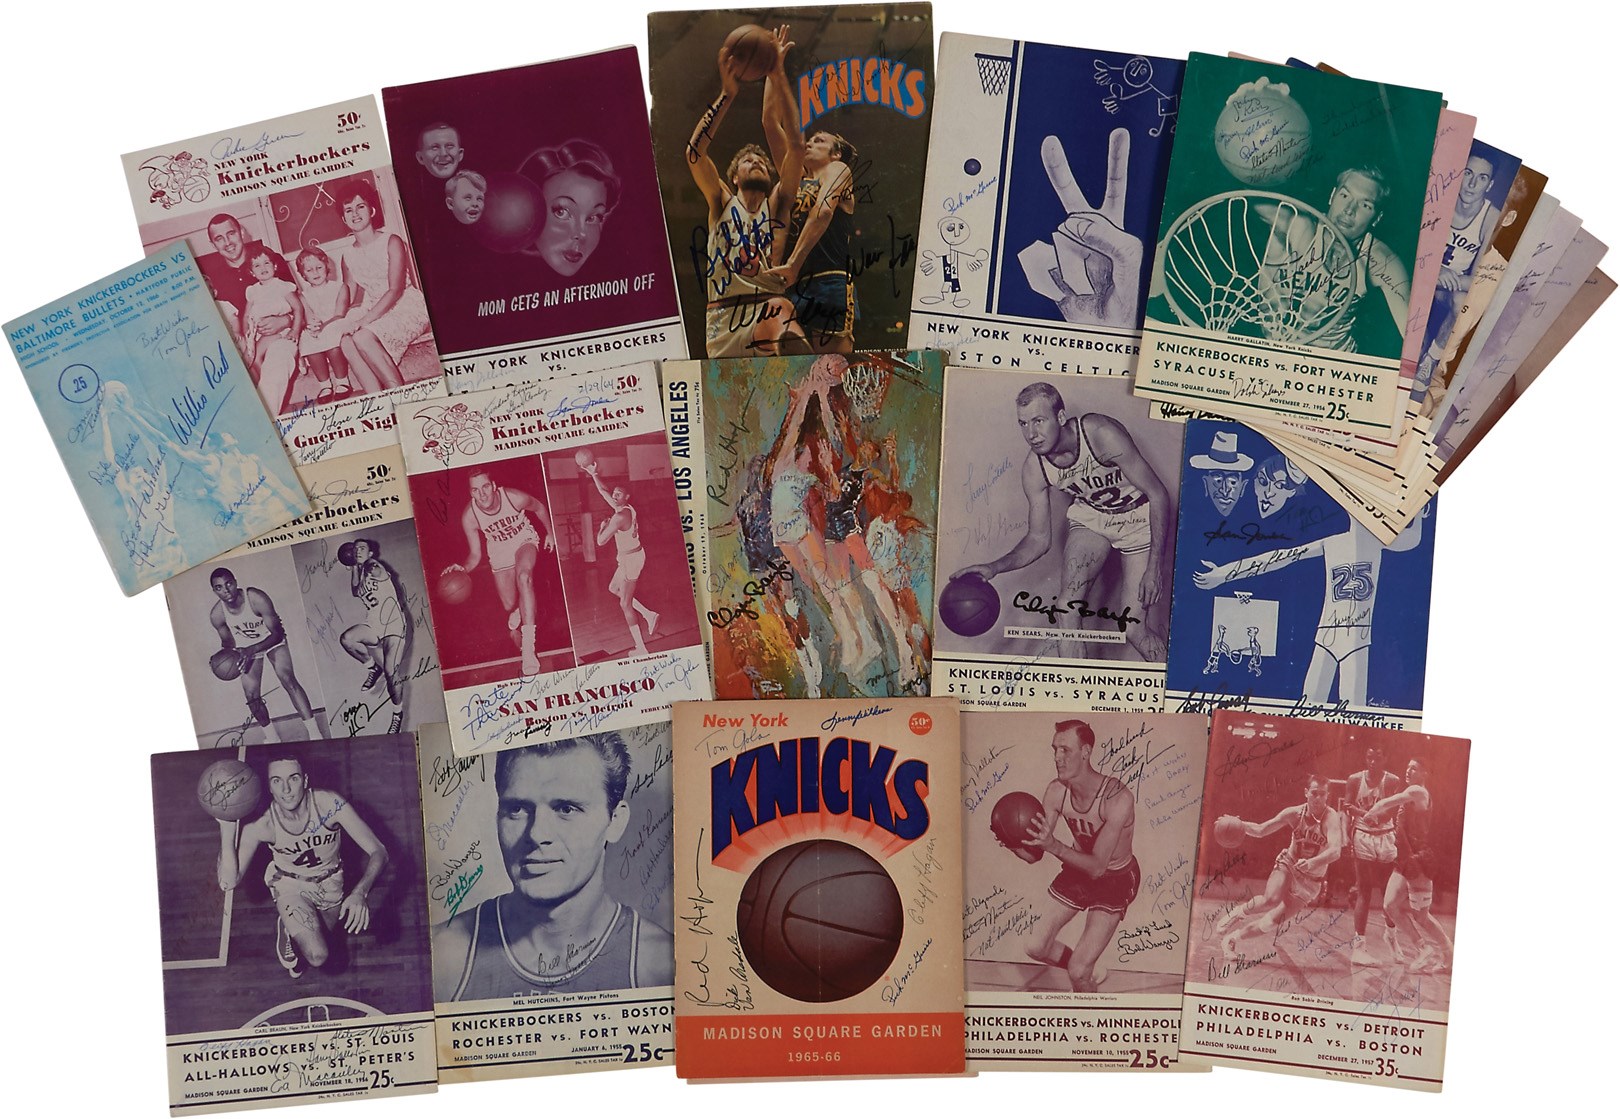 1940s-70s New York Knickerbockers Autographed Program Archive - 650+ Sigs (90+)